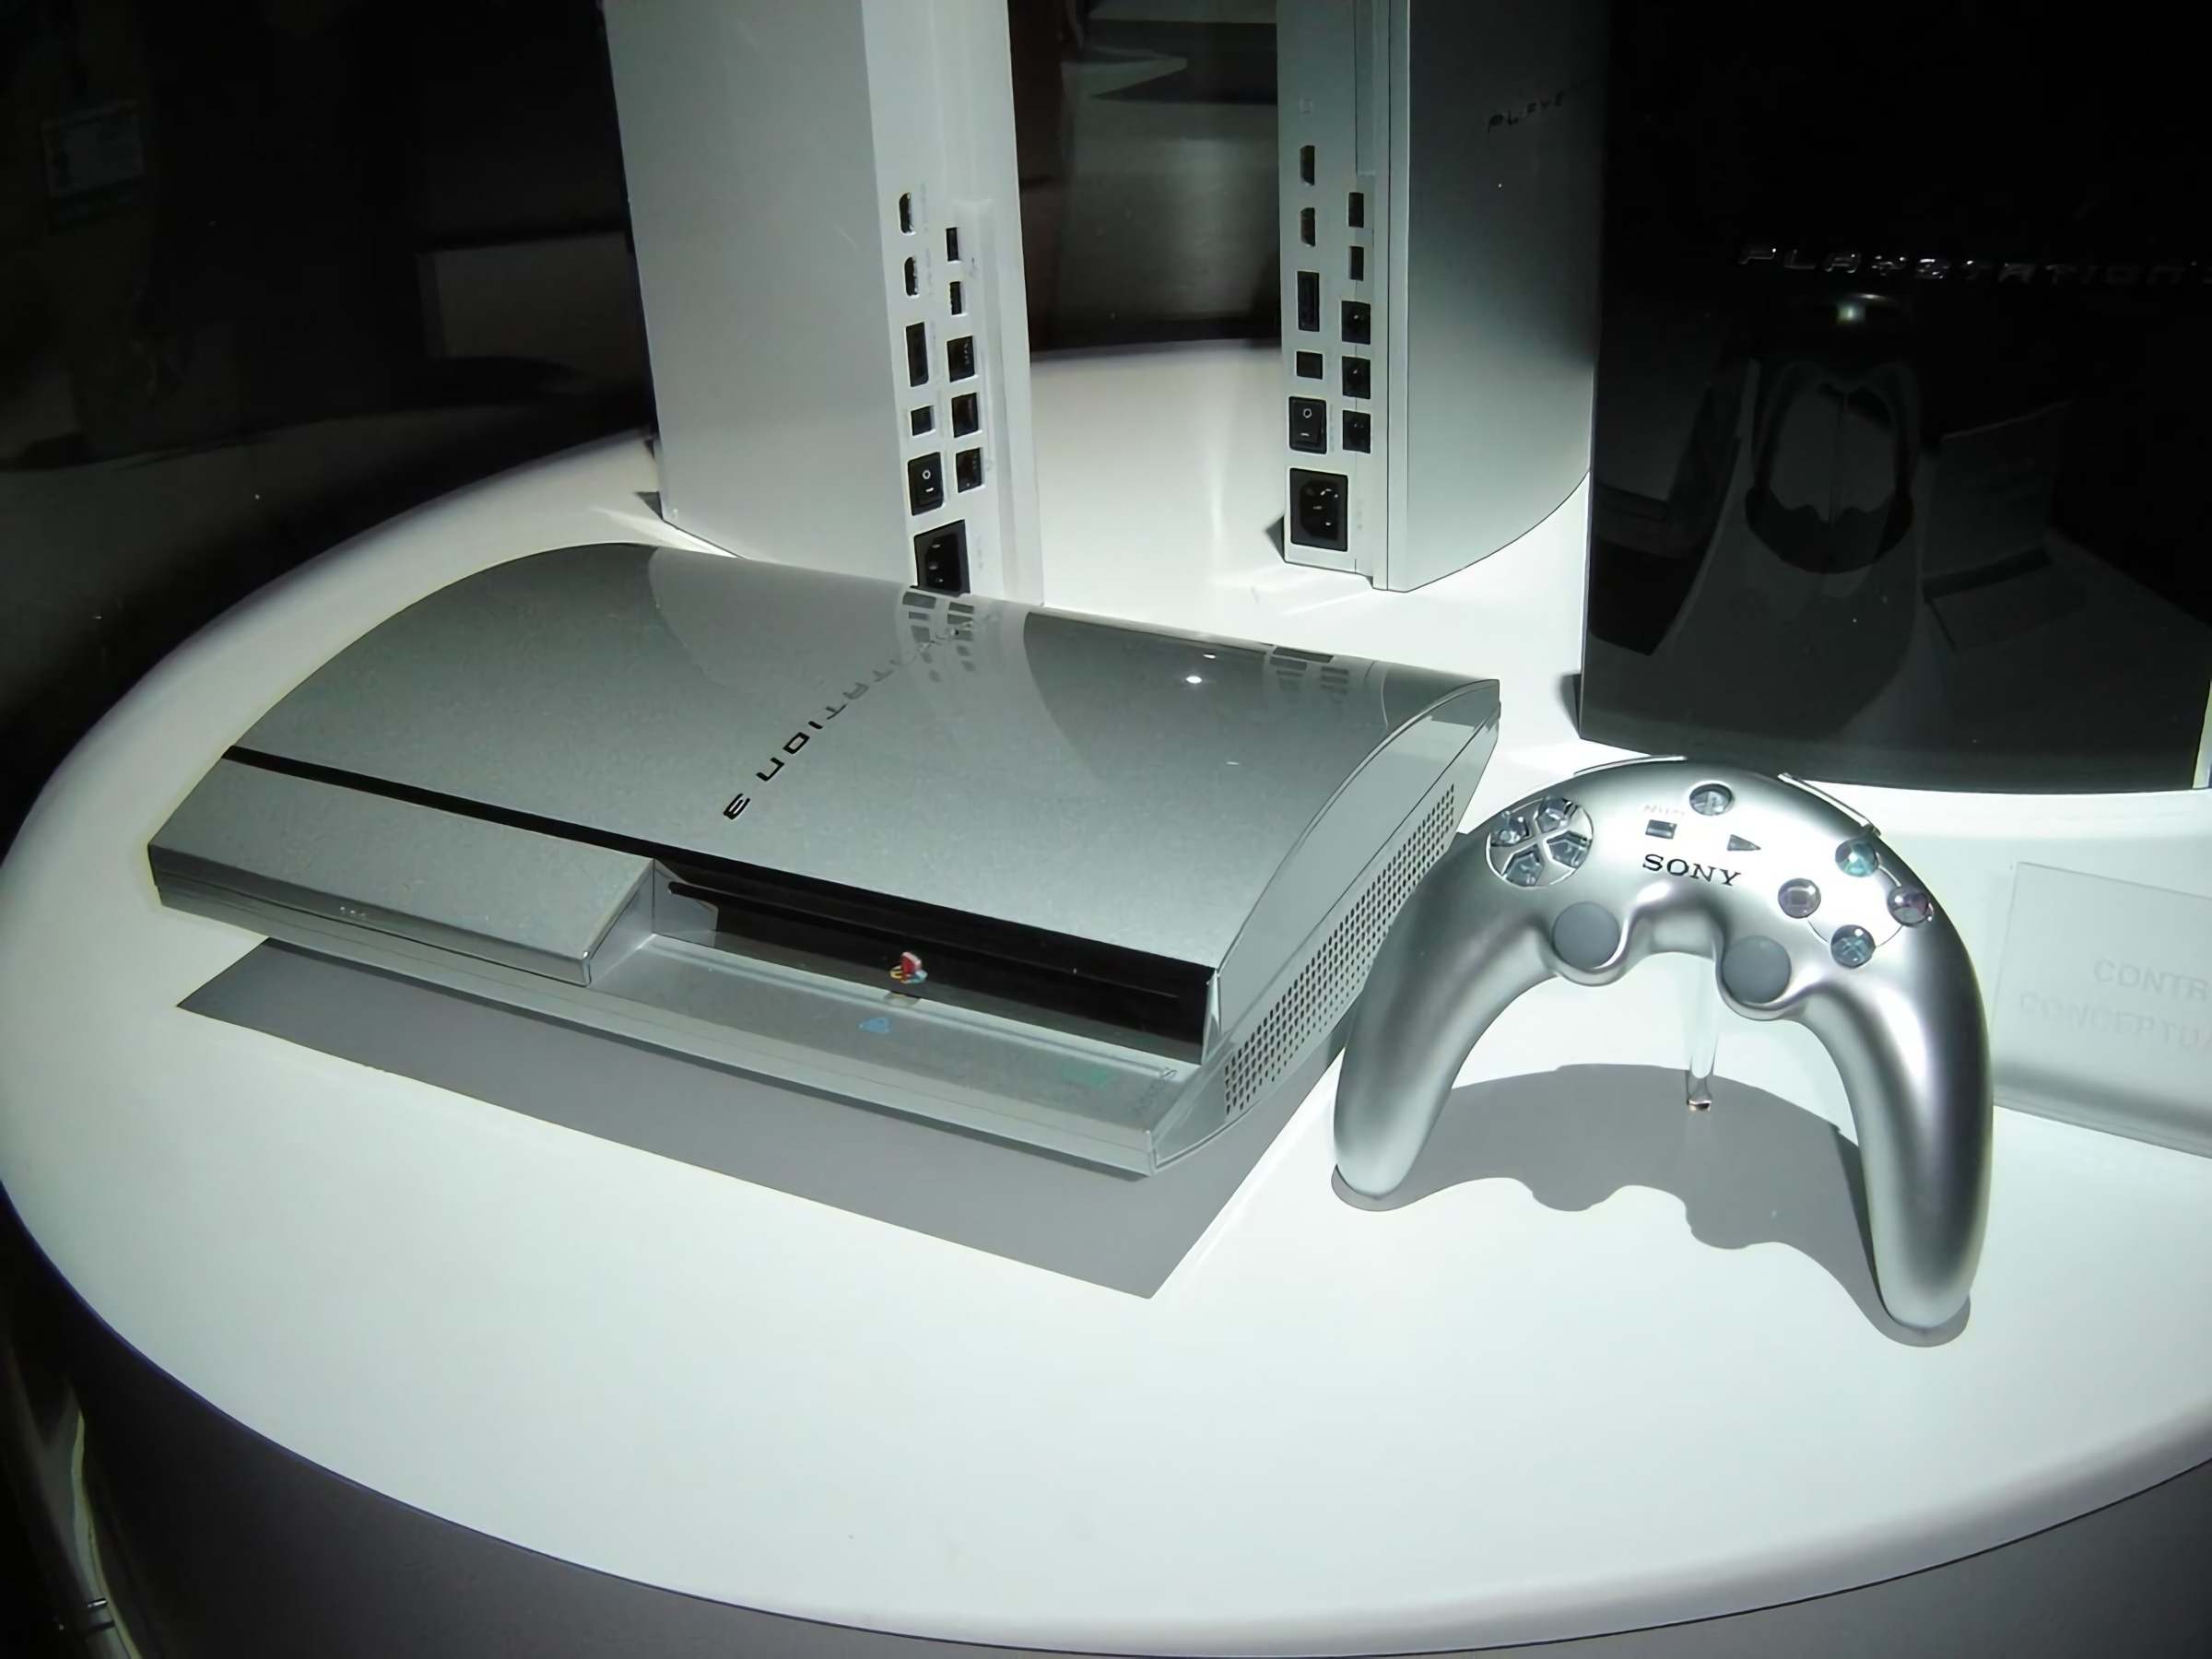 Ps5 wifi. Sony ps3 Silver. PLAYSTATION 3 Console Prototype. Sony ps1 DEVKIT. Ps3 контроллер Бумеранг.